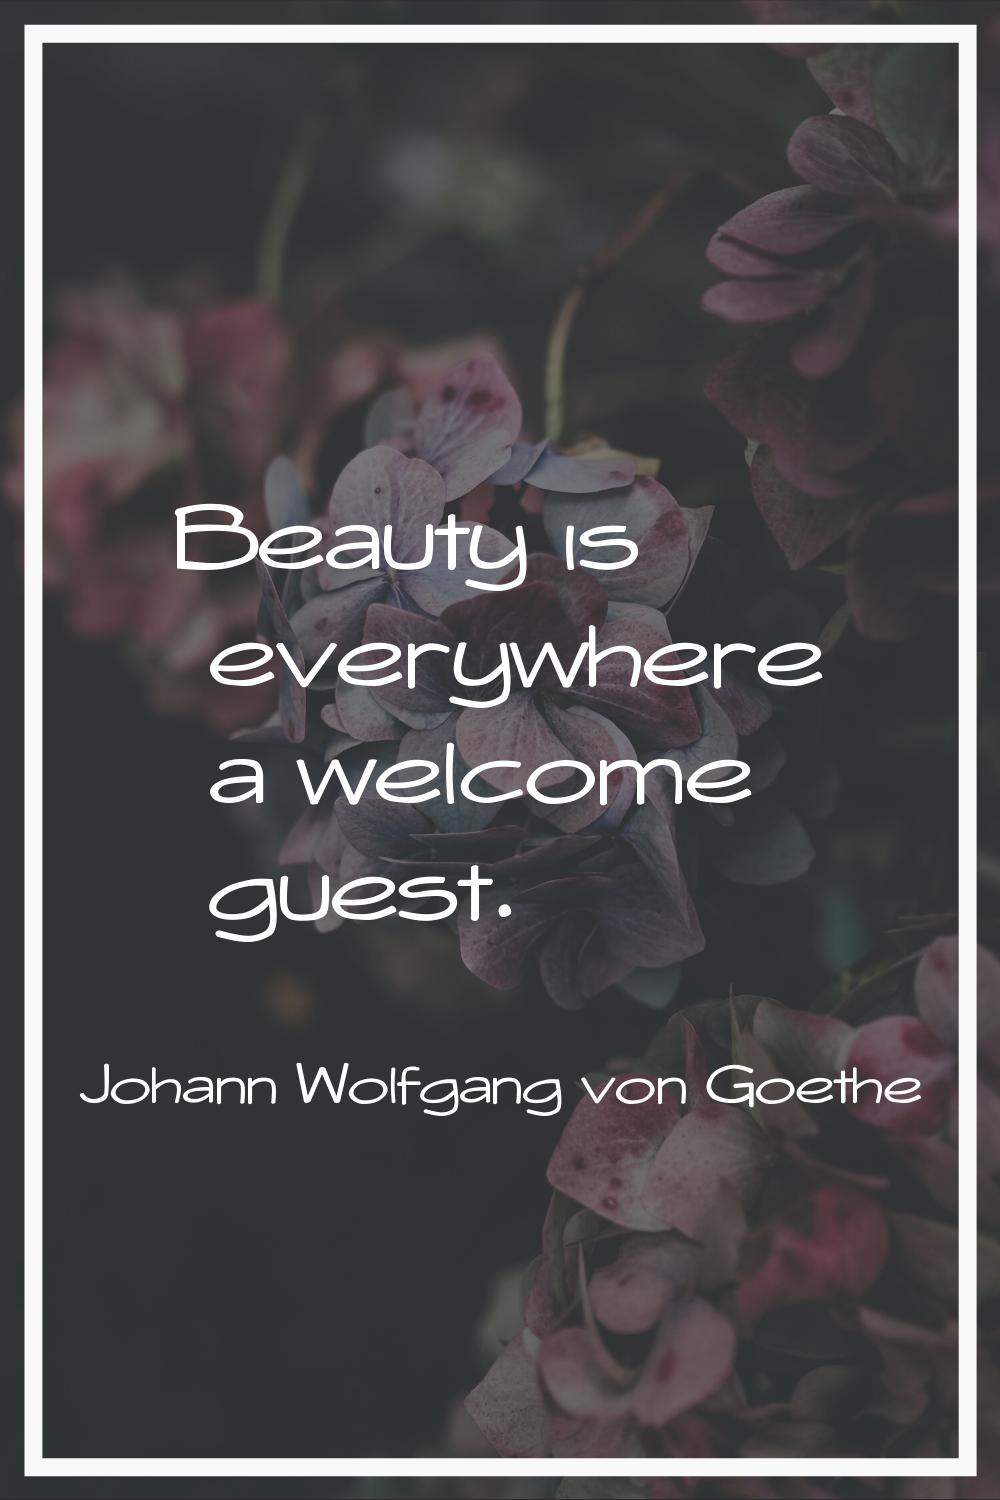 Beauty is everywhere a welcome guest.